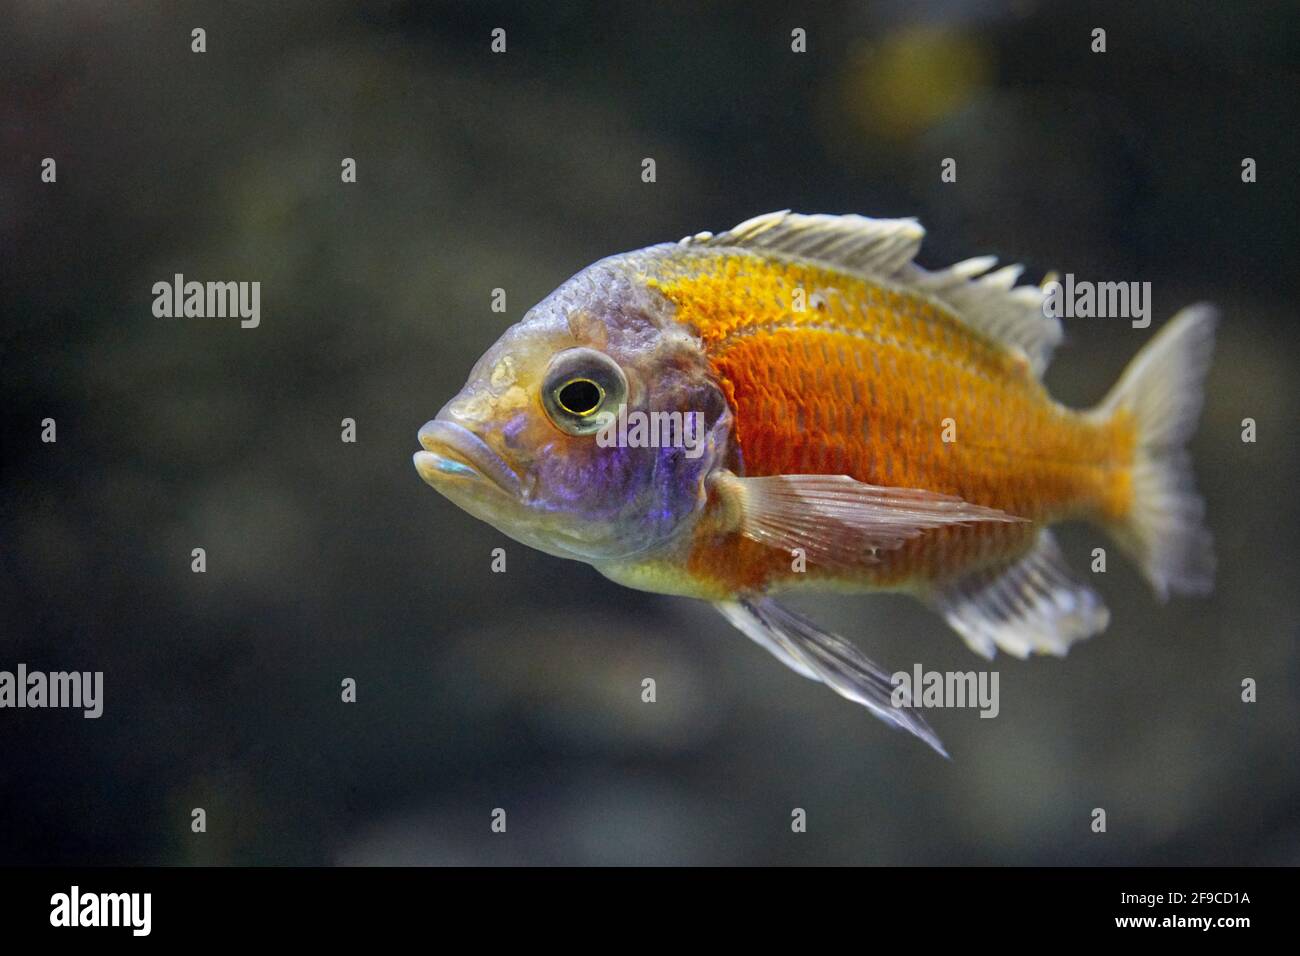 Captive Redfin Hap (Copadichromis borleyi), a species of haplochromine cichlid fish endemic to Lake Malawi in East Africa. Stock Photo